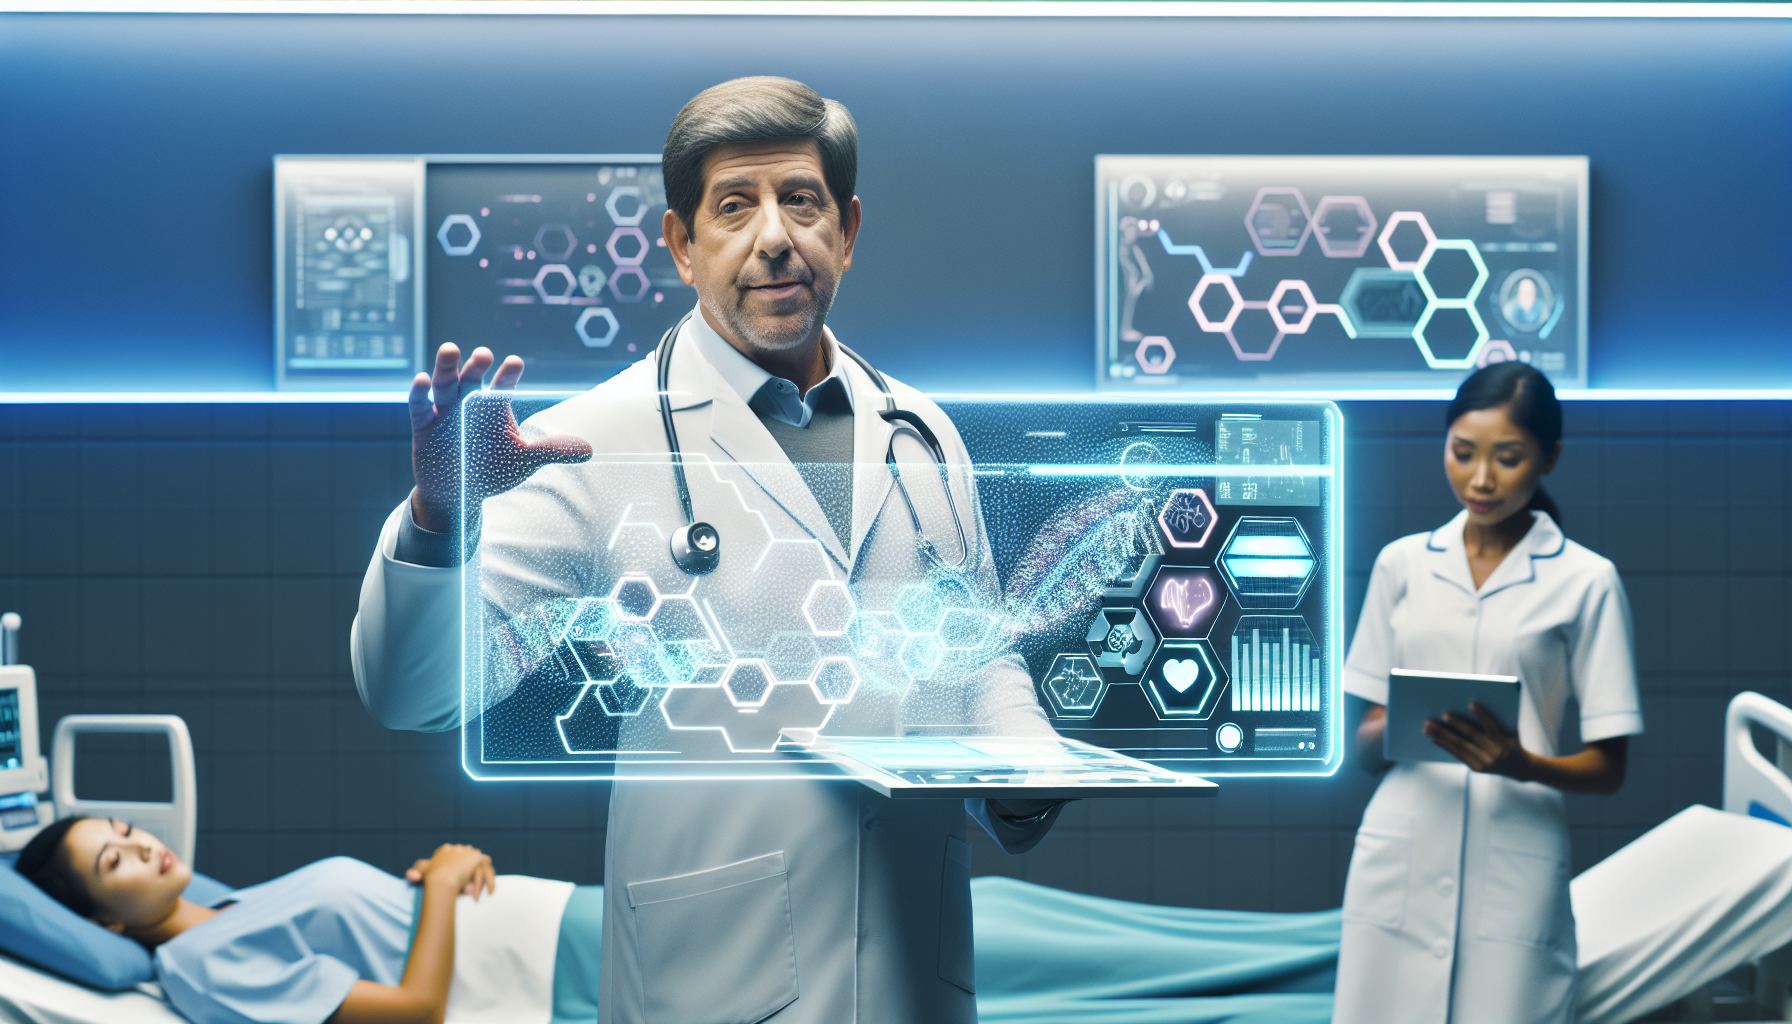 AI technology in healthcare setting